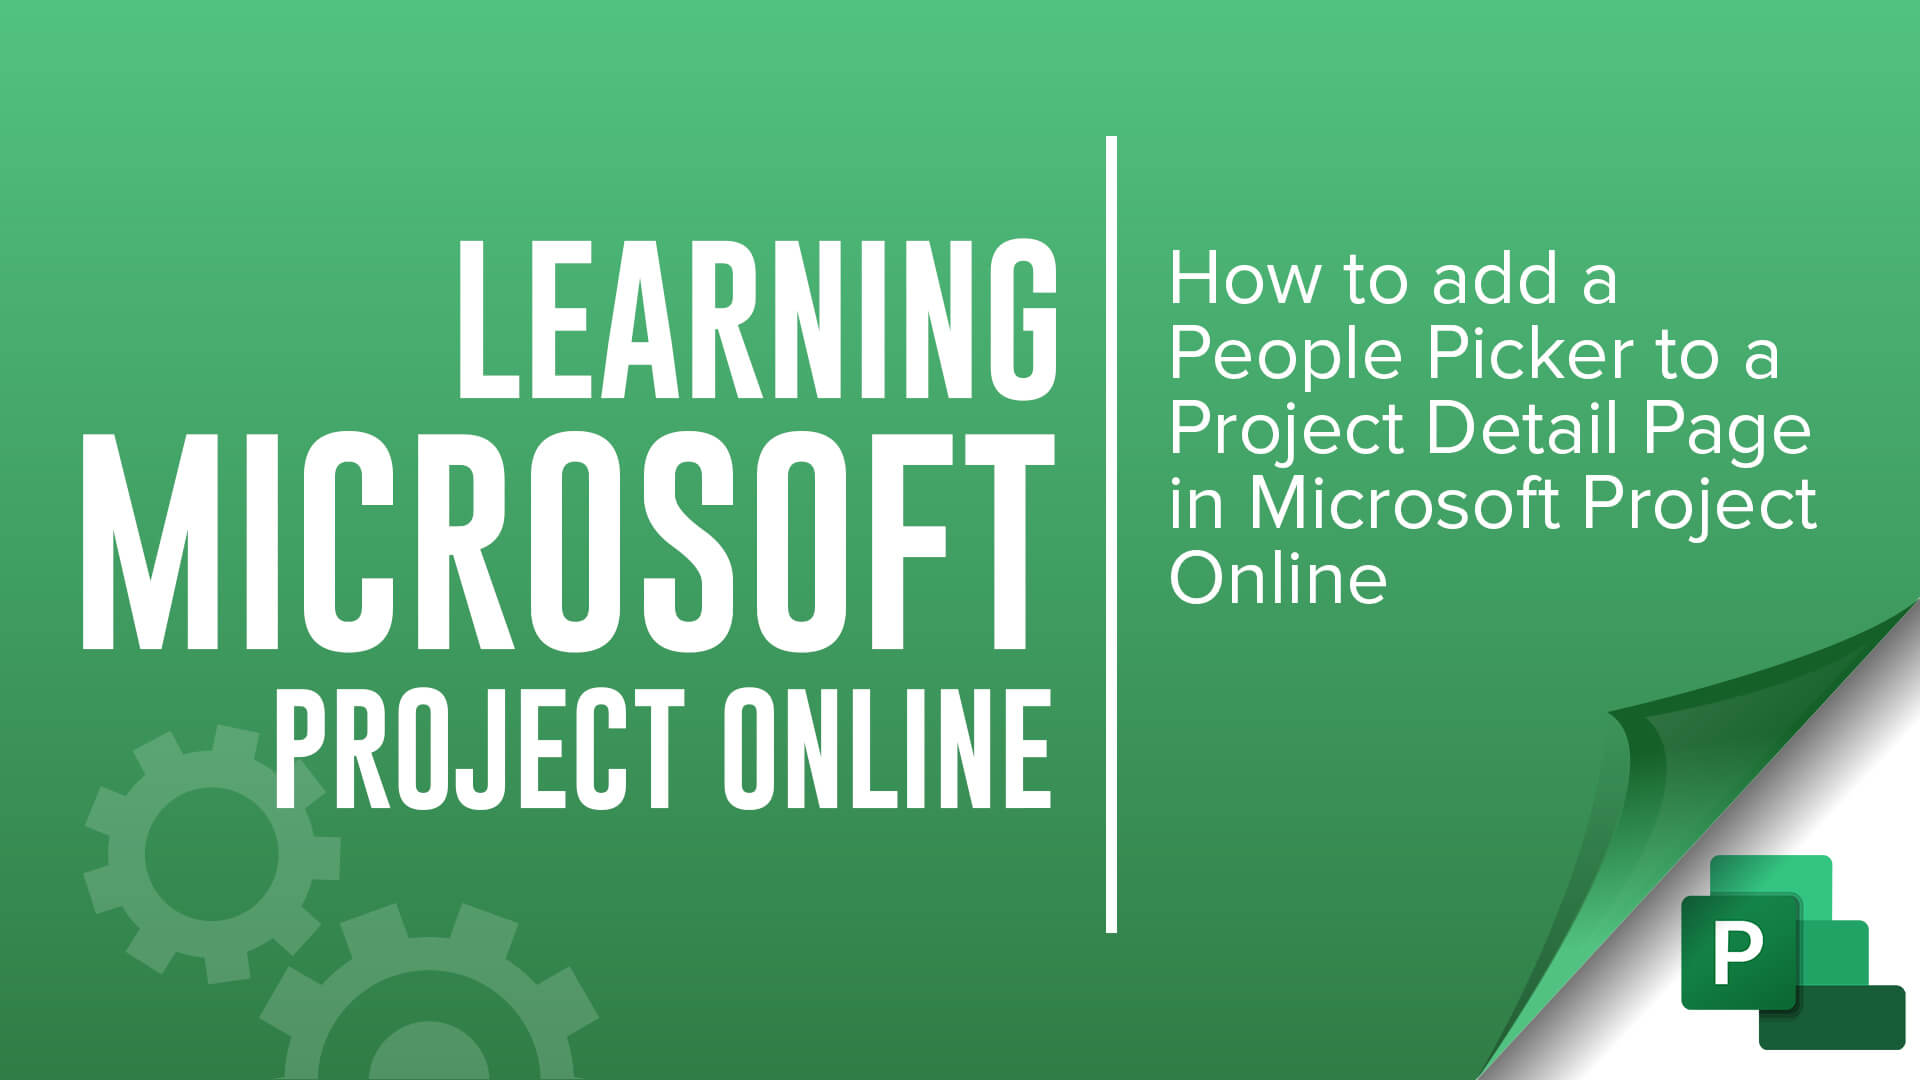 learning Microsoft Project Online - How to add a people picker to a project detail page in microsoft project online